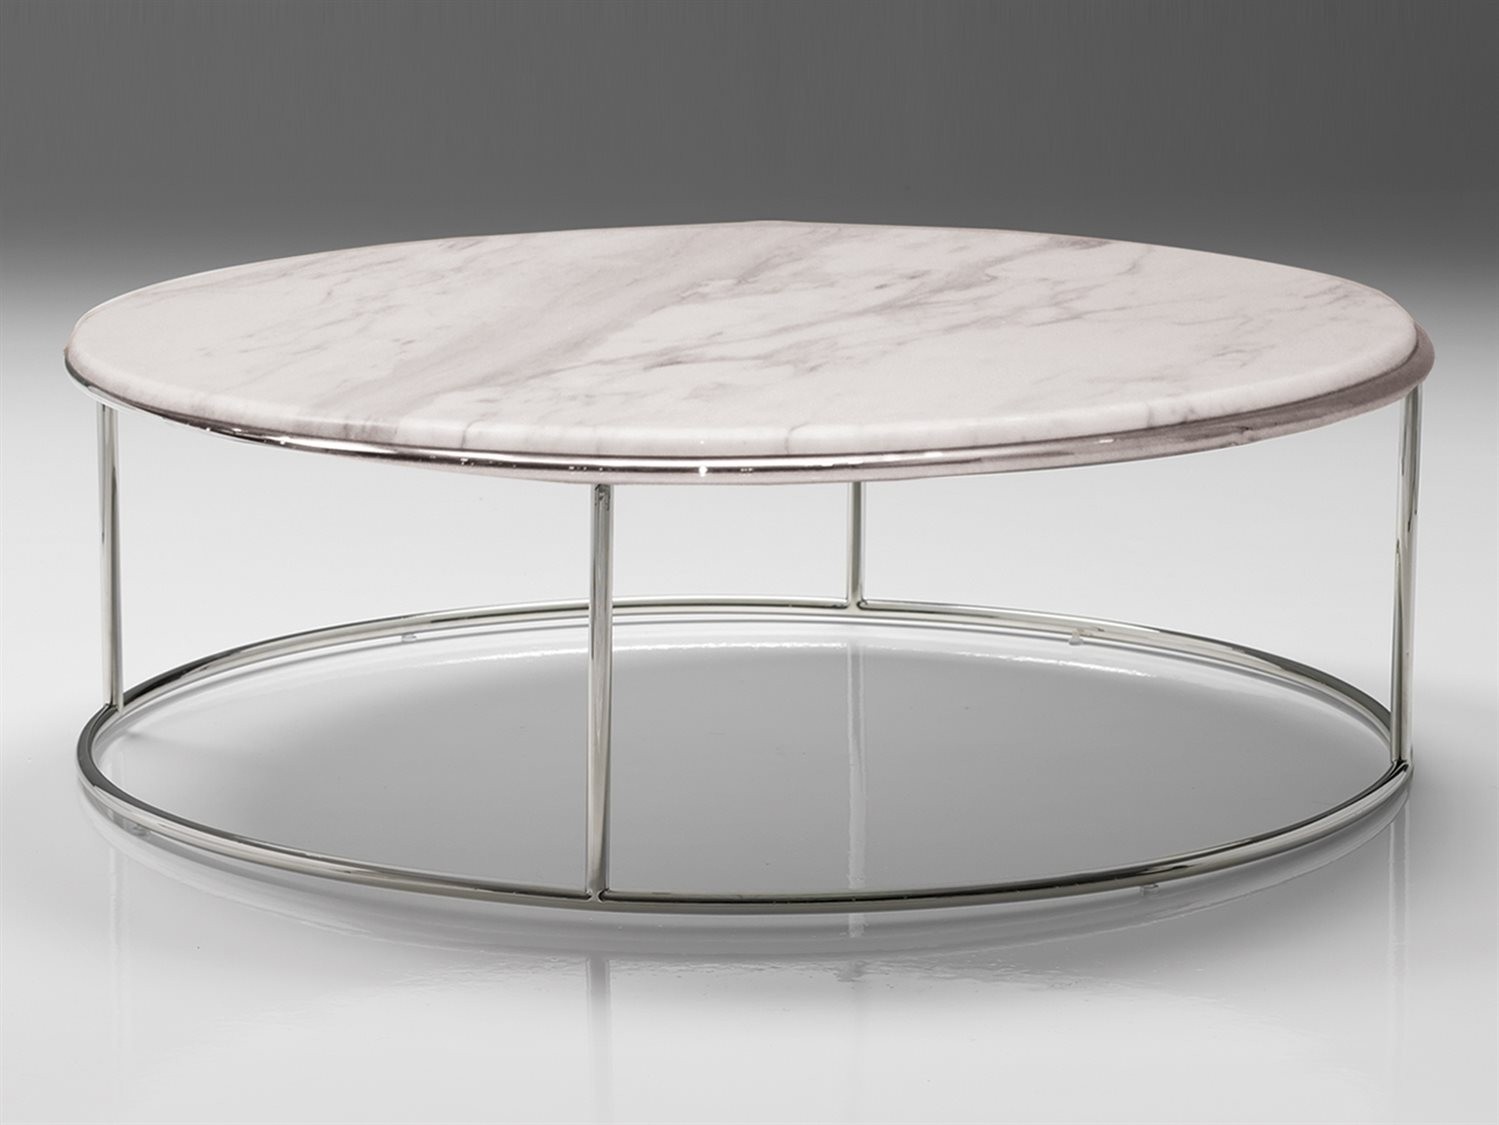 30 inspirations of smart large round marble top coffee tables